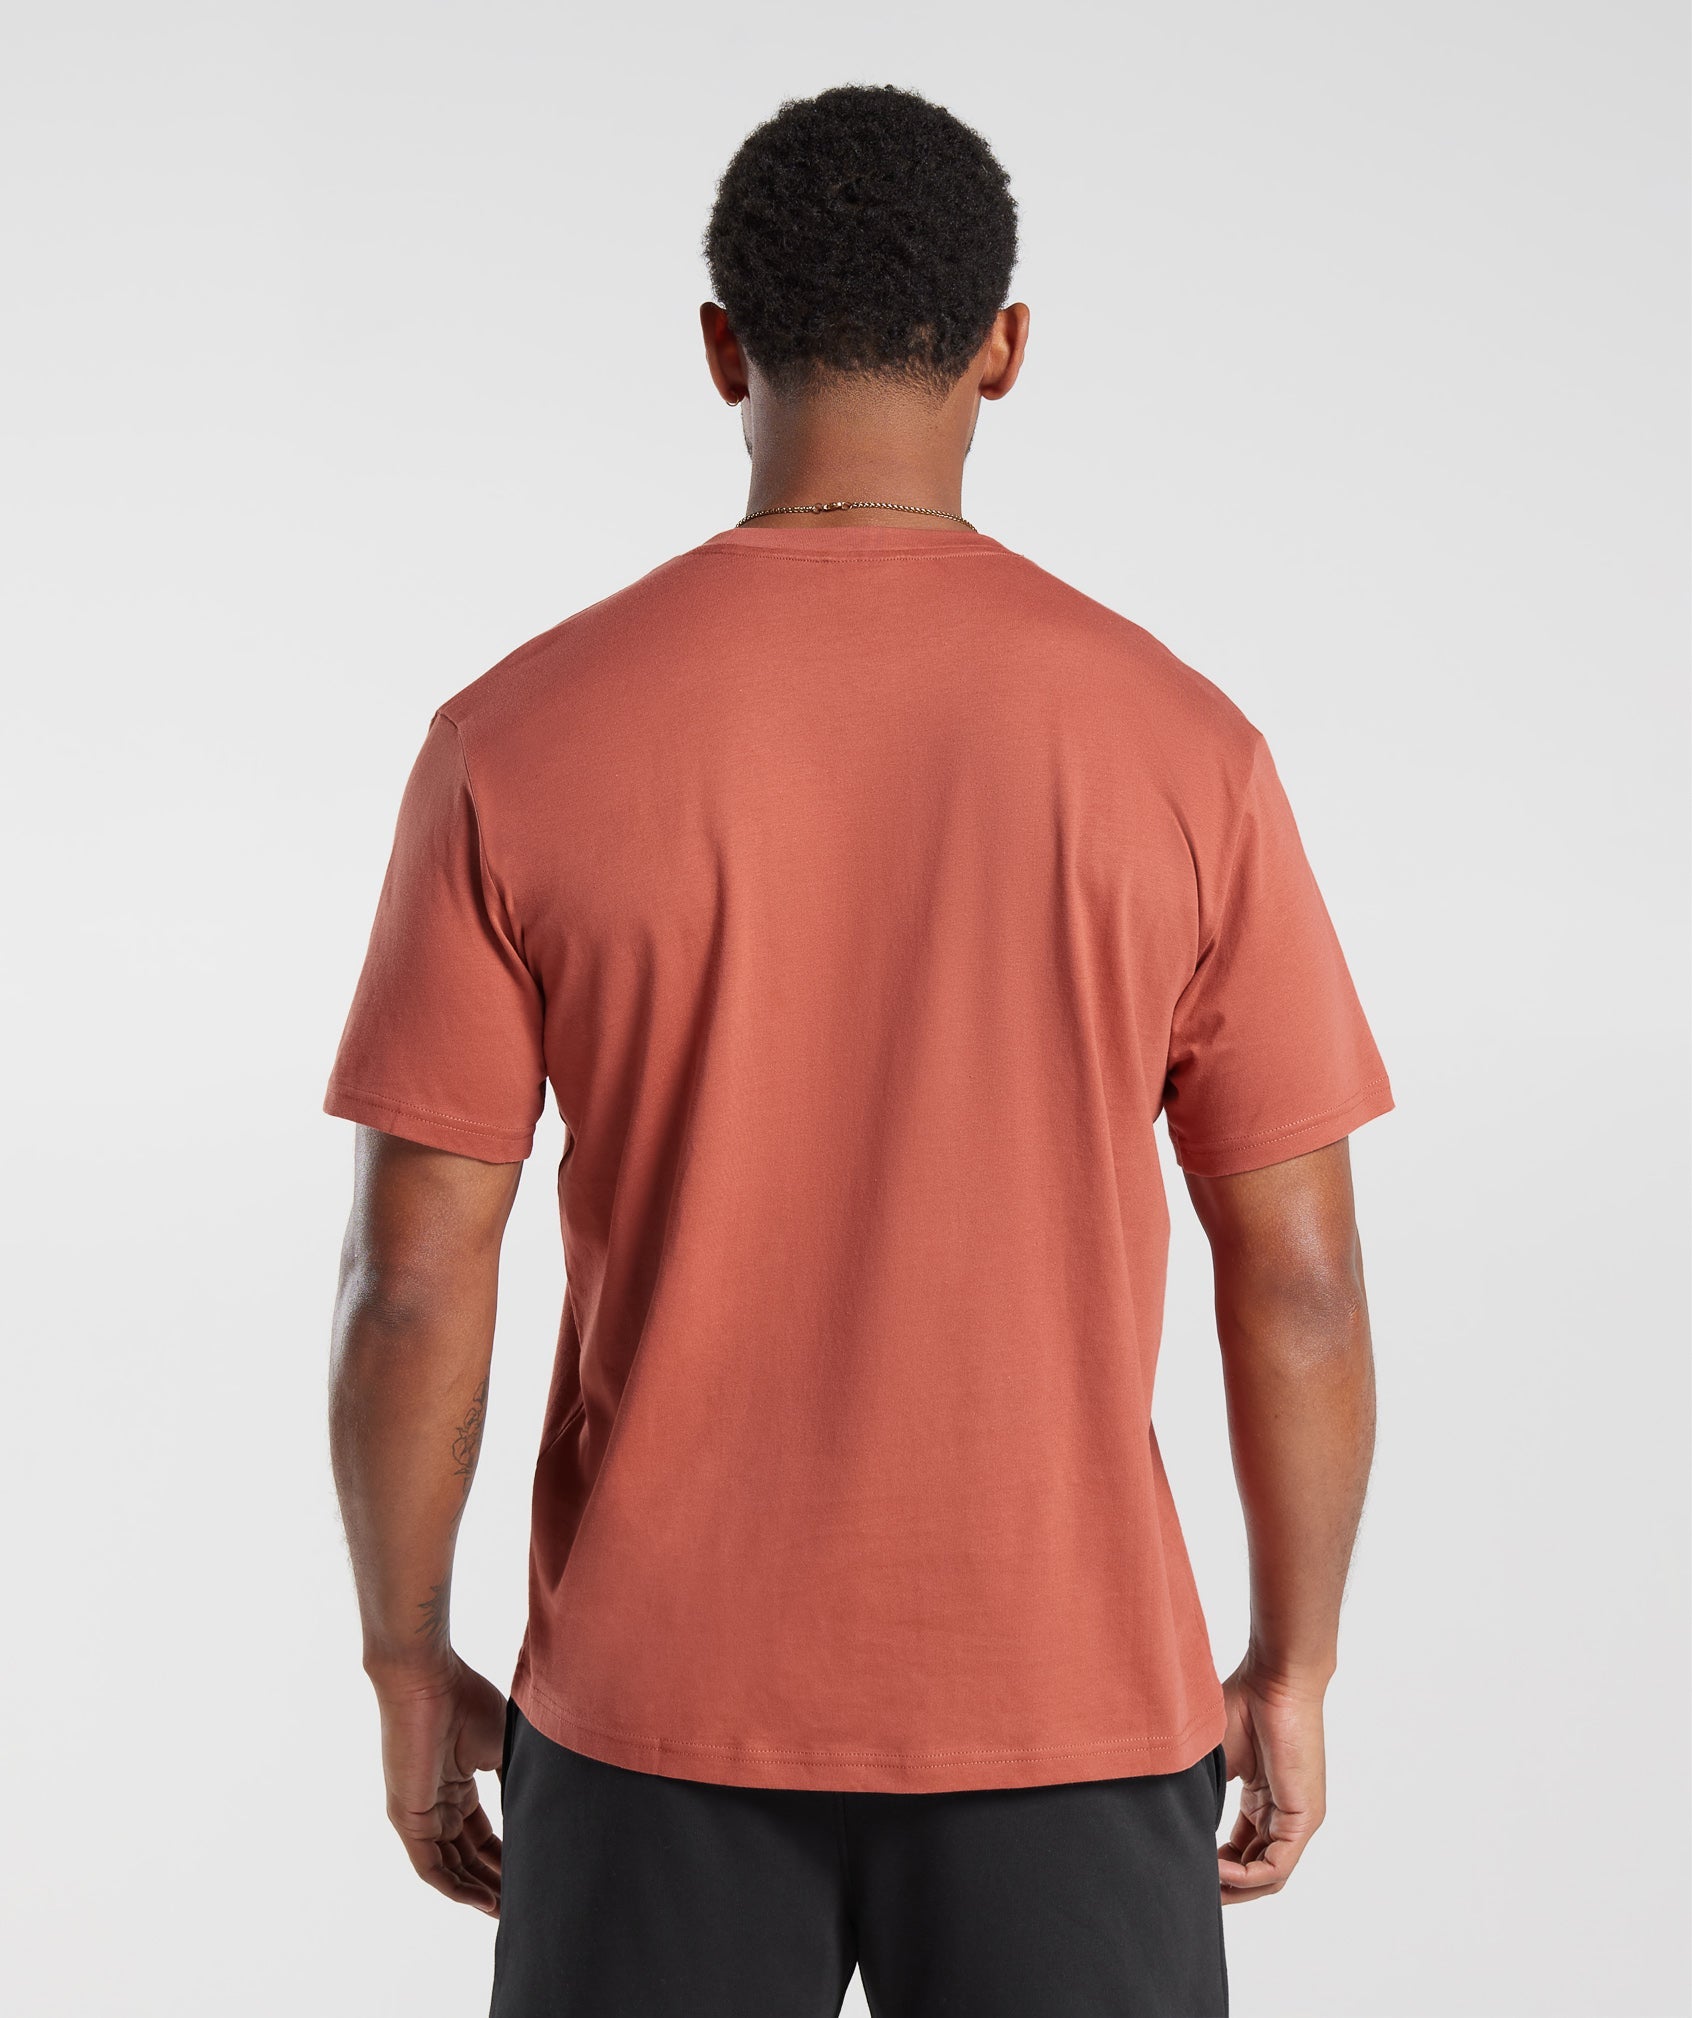 Crest T-Shirt in Persimmon Red